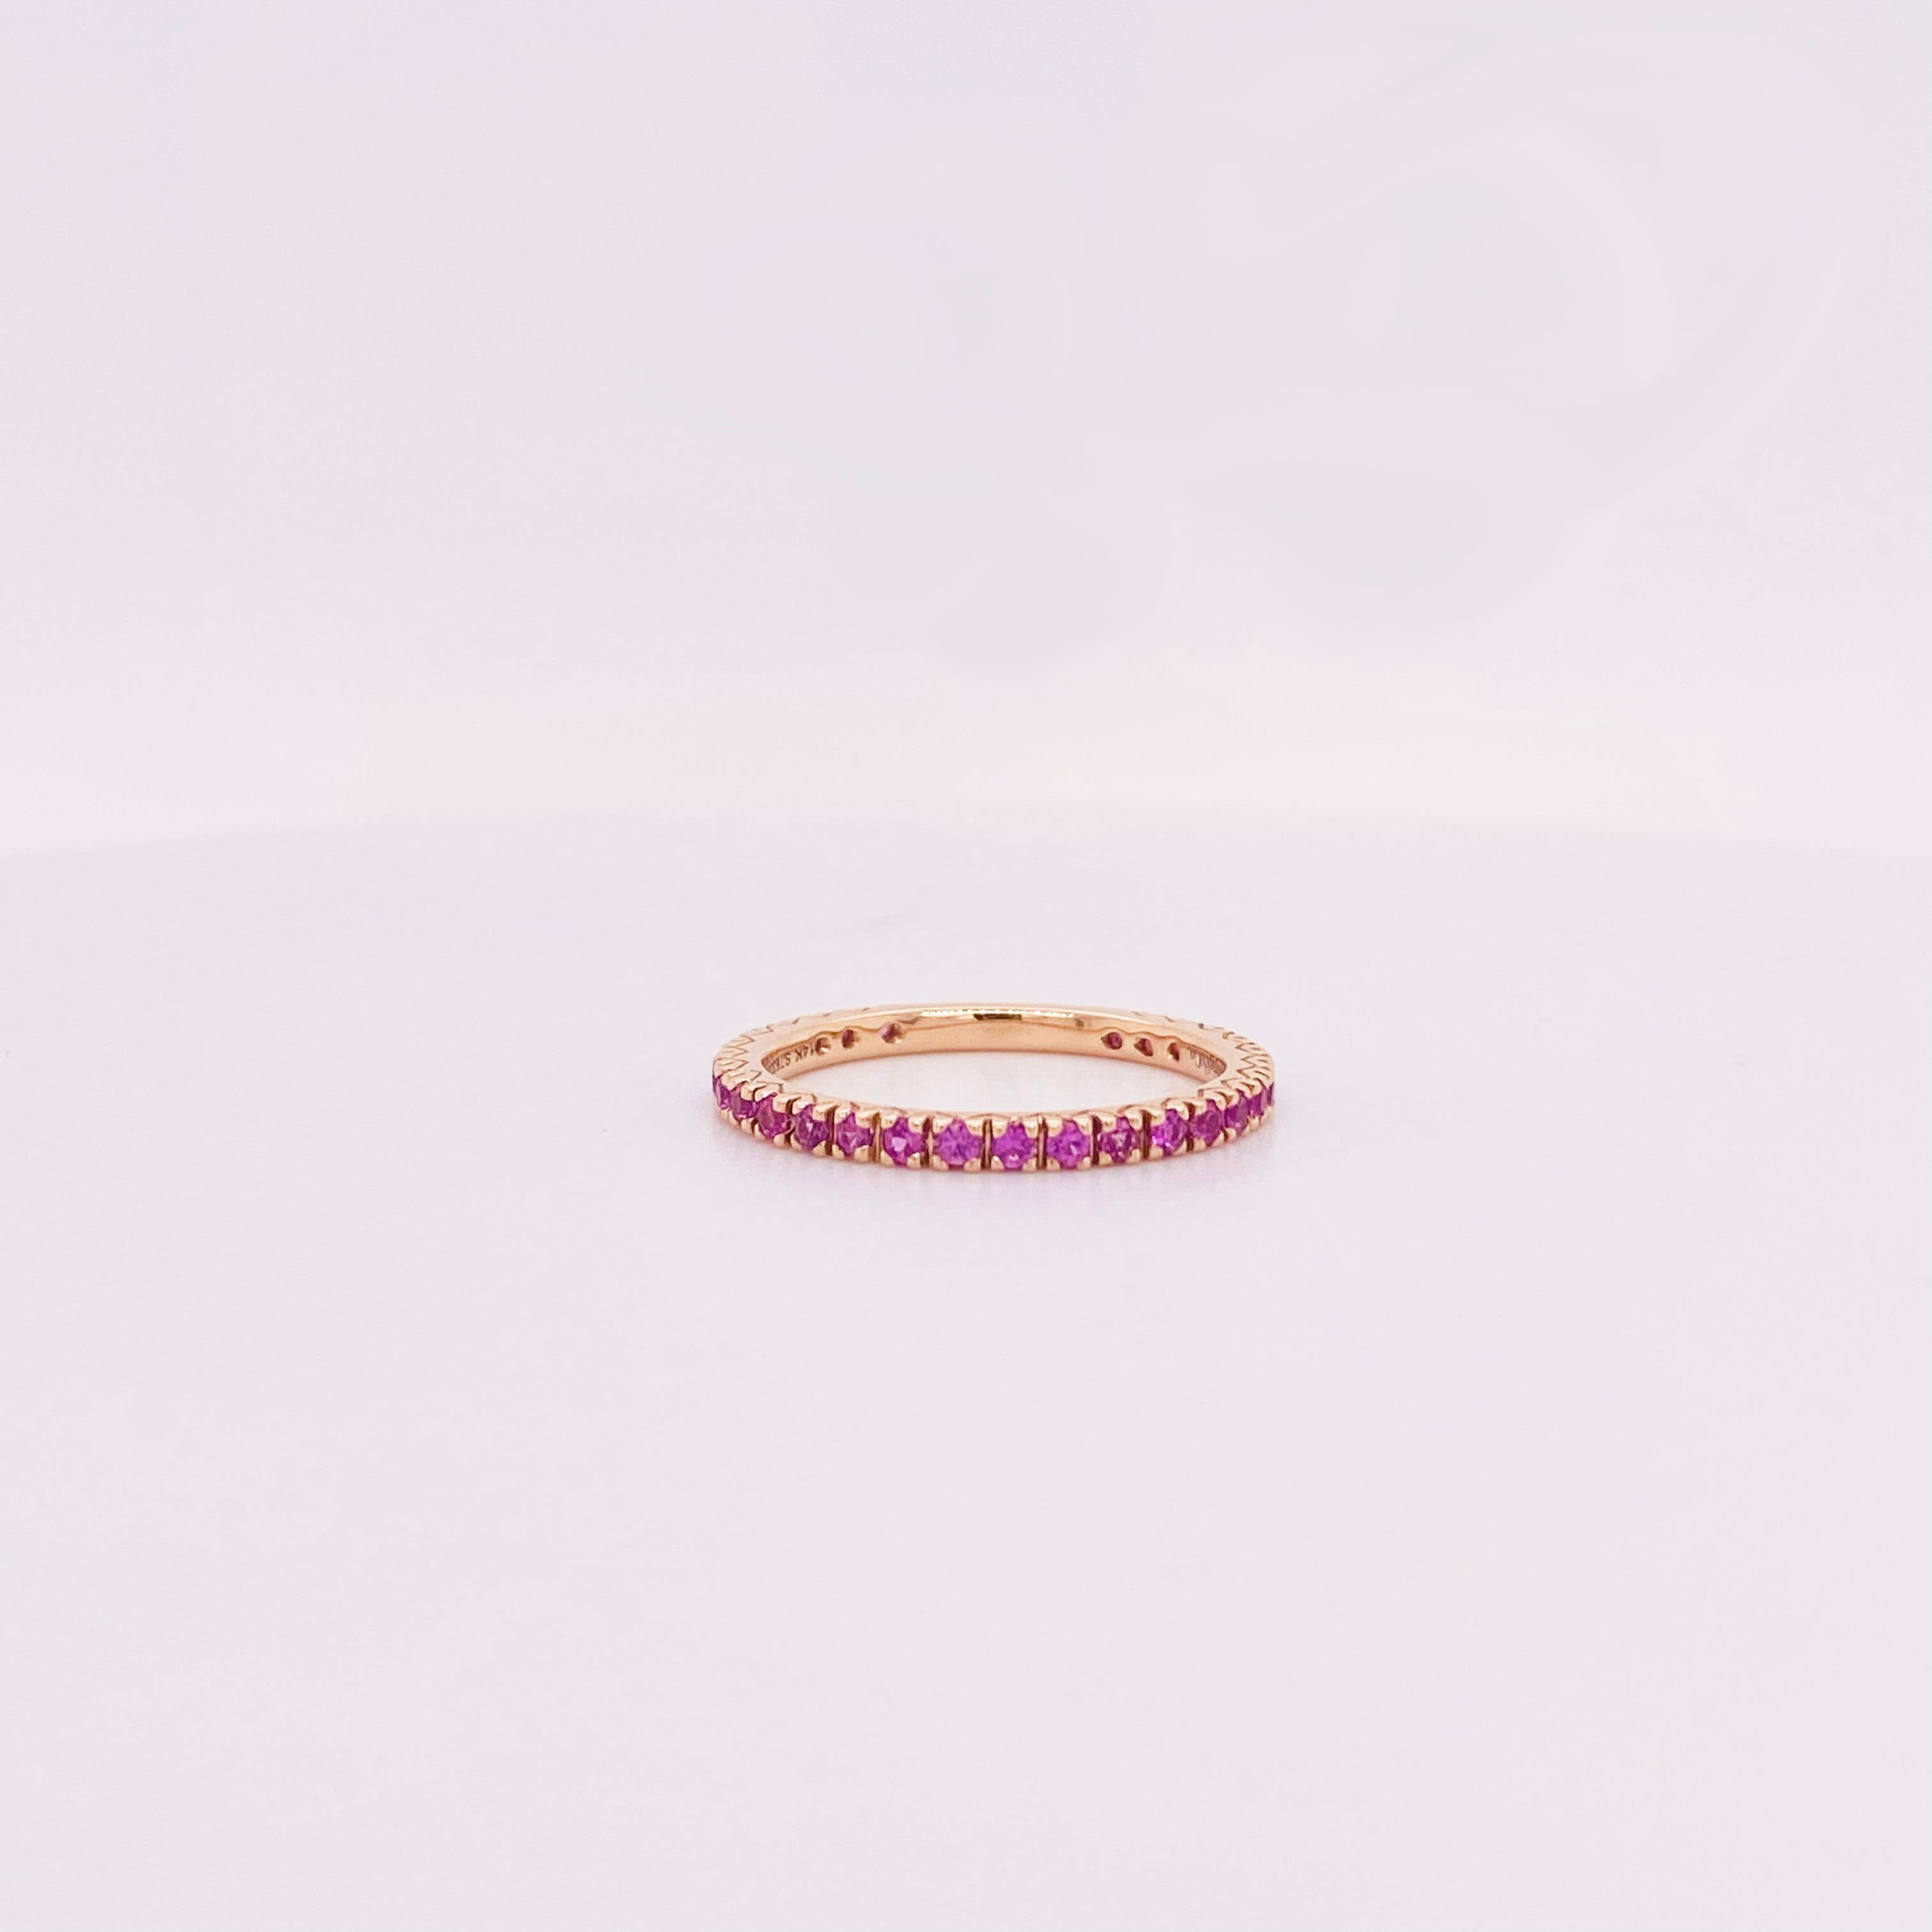 For Sale:  Pink Sapphire Laura Band Set in 14k Rose Gold, Stackable Pink 3